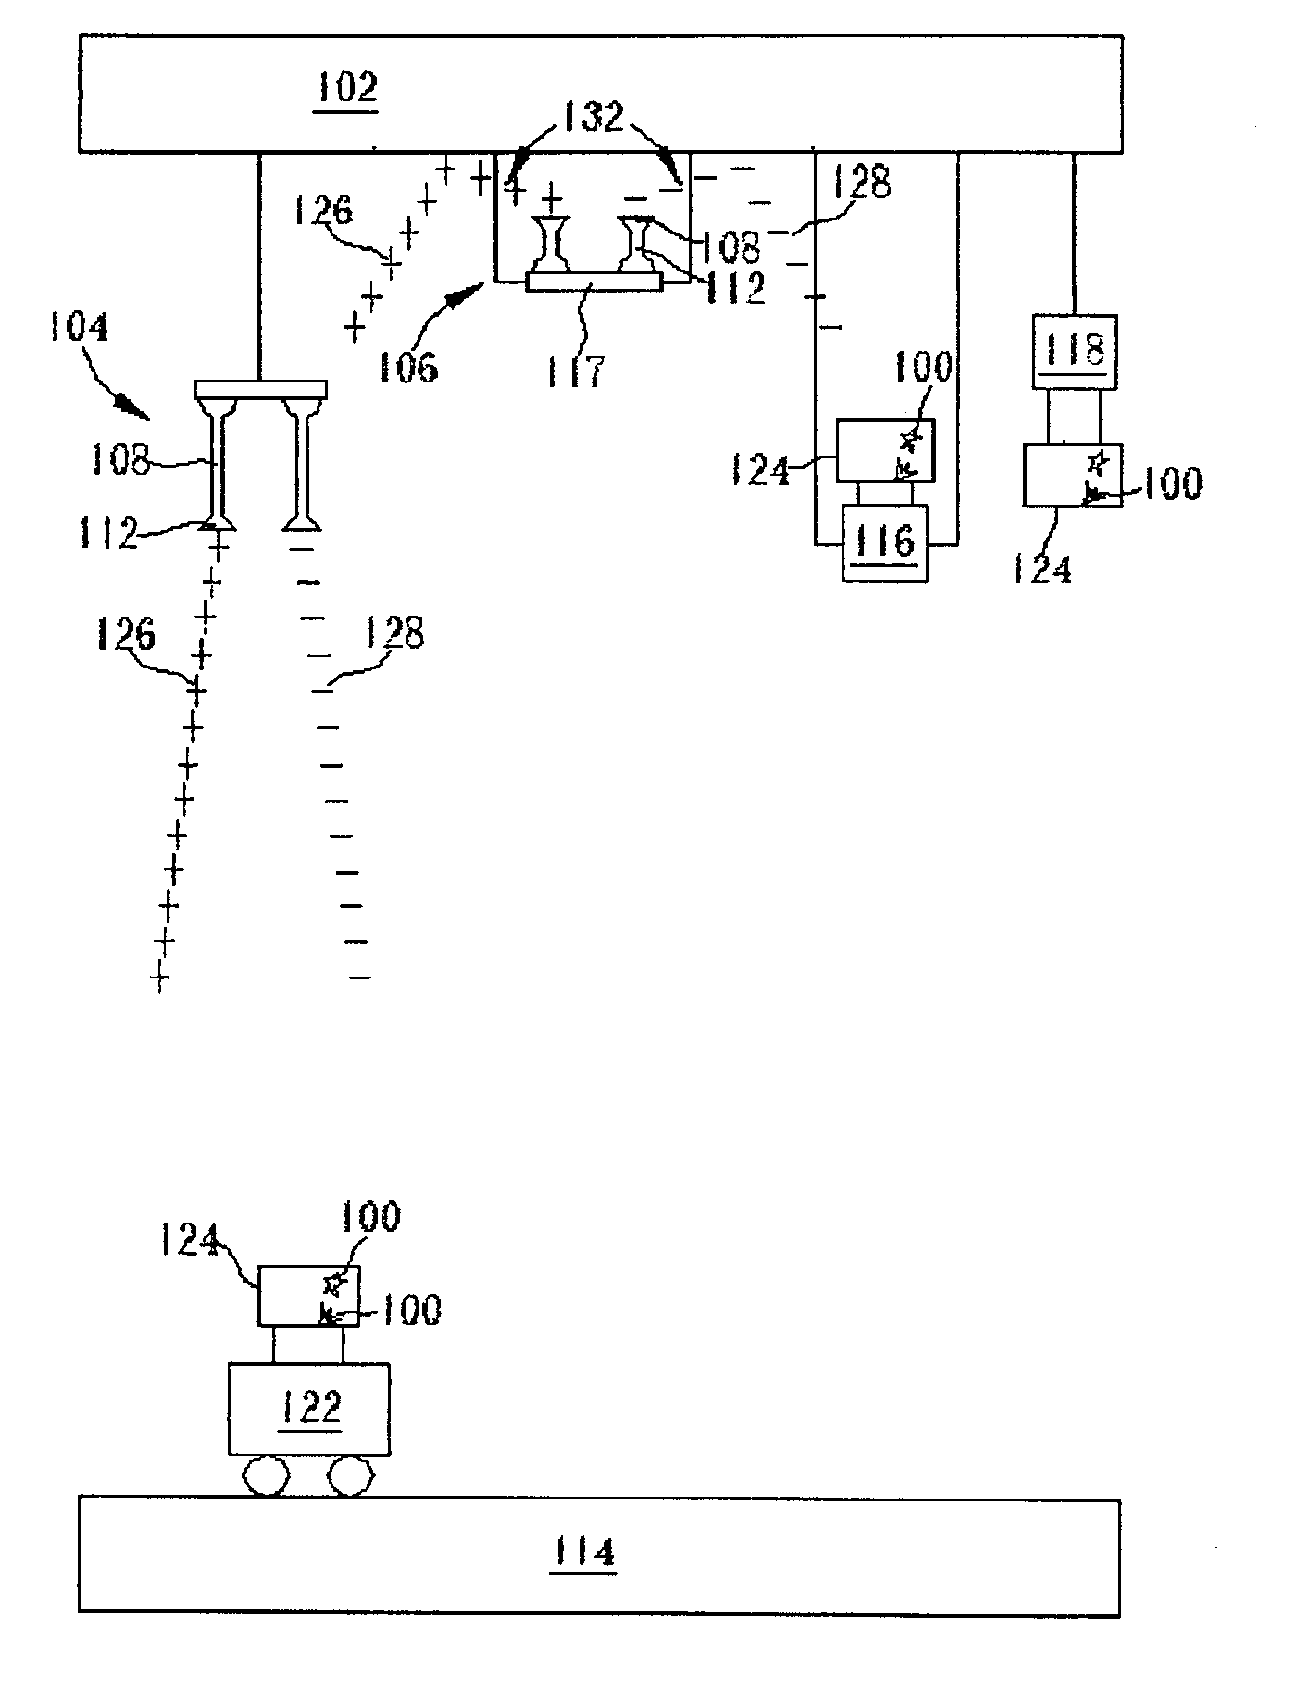 Method for preventing electrostatic discharge in a clean room